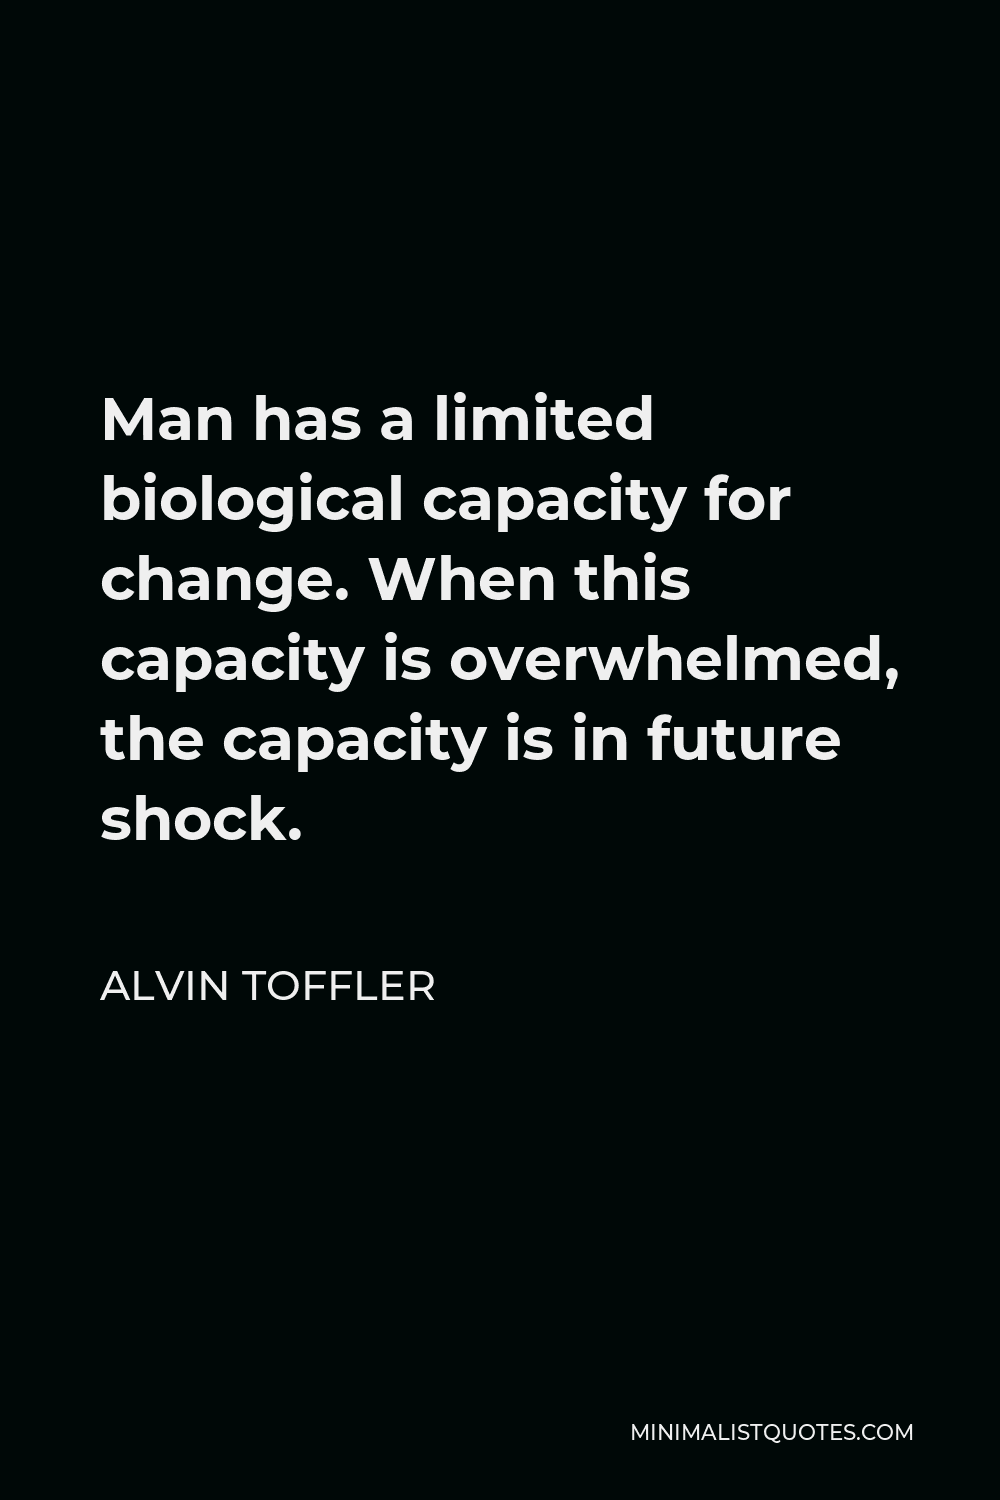 Alvin Toffler Quote - Man has a limited biological capacity for change. When this capacity is overwhelmed, the capacity is in future shock.